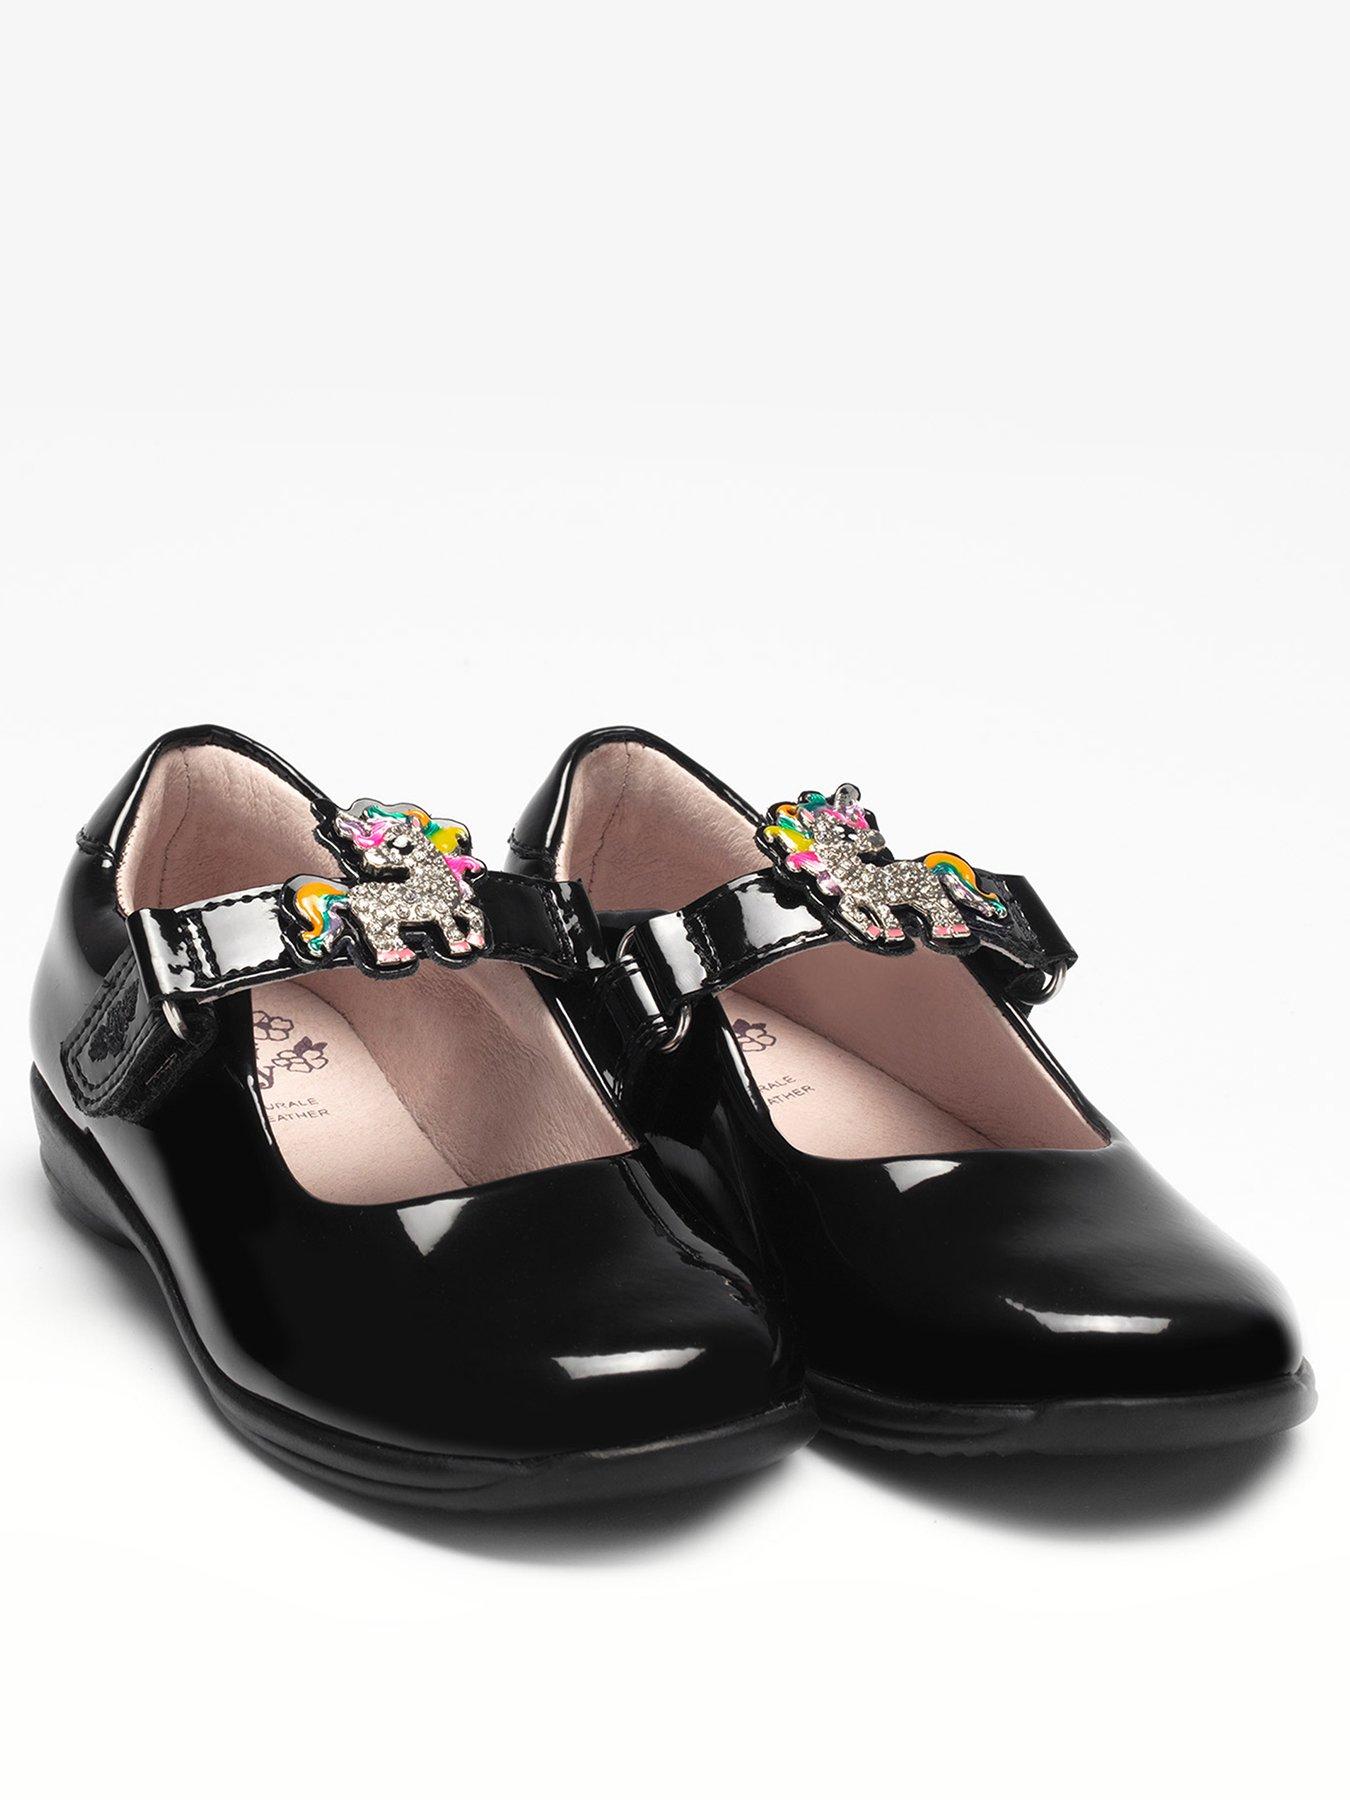 Lelli Kelly LK 8304 Black Patent sangle amovible Strass École Chaussures Taille 11